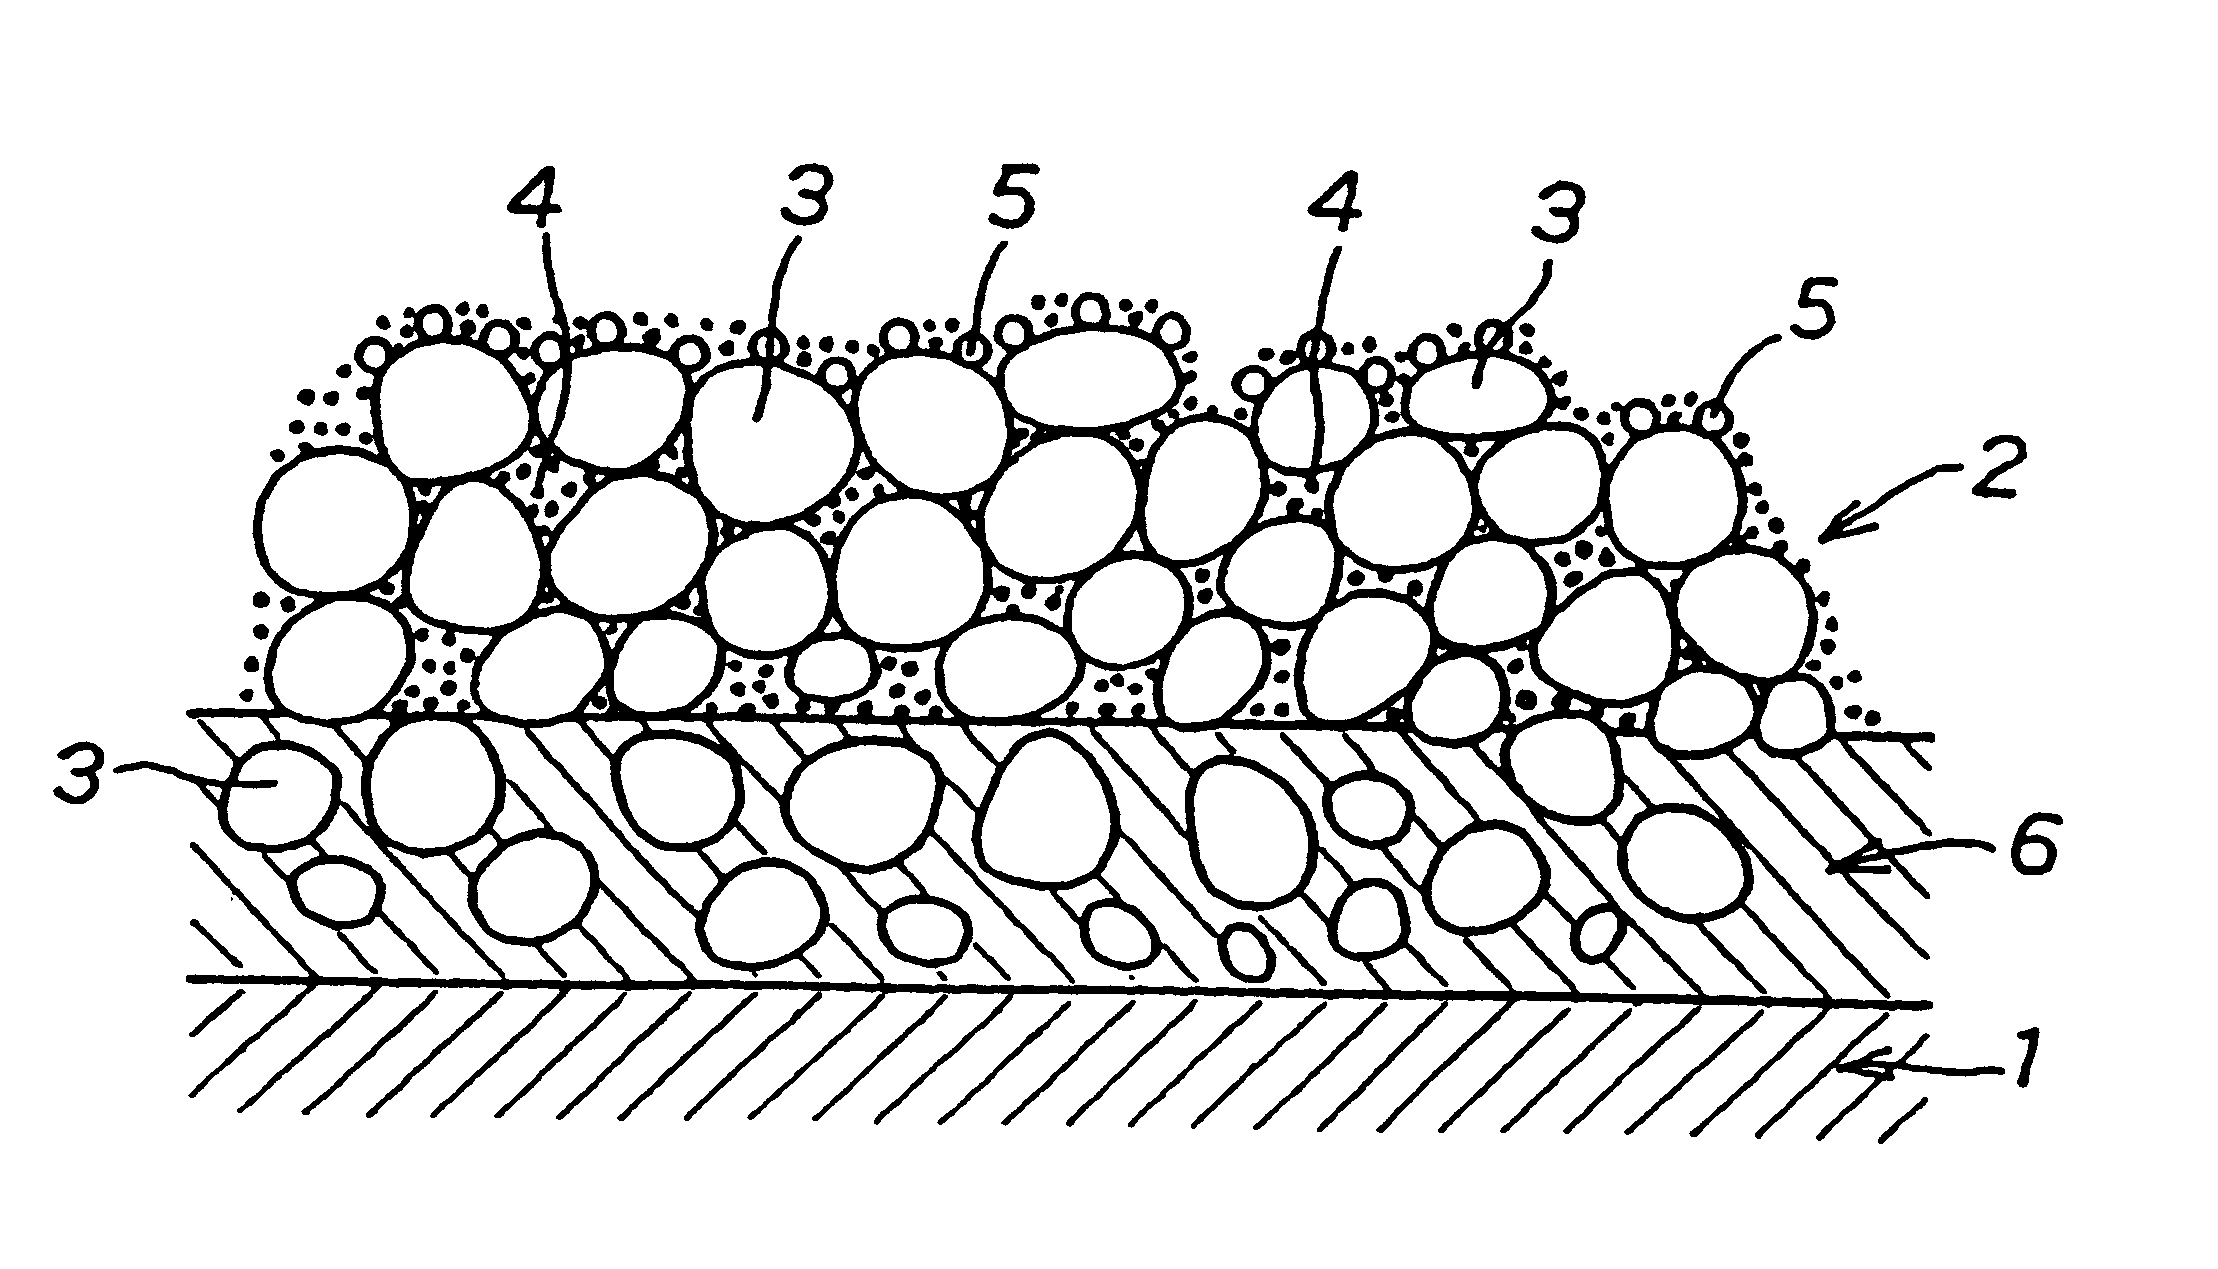 Multi-functional material with photocatalytic functions and method of manufacturing same